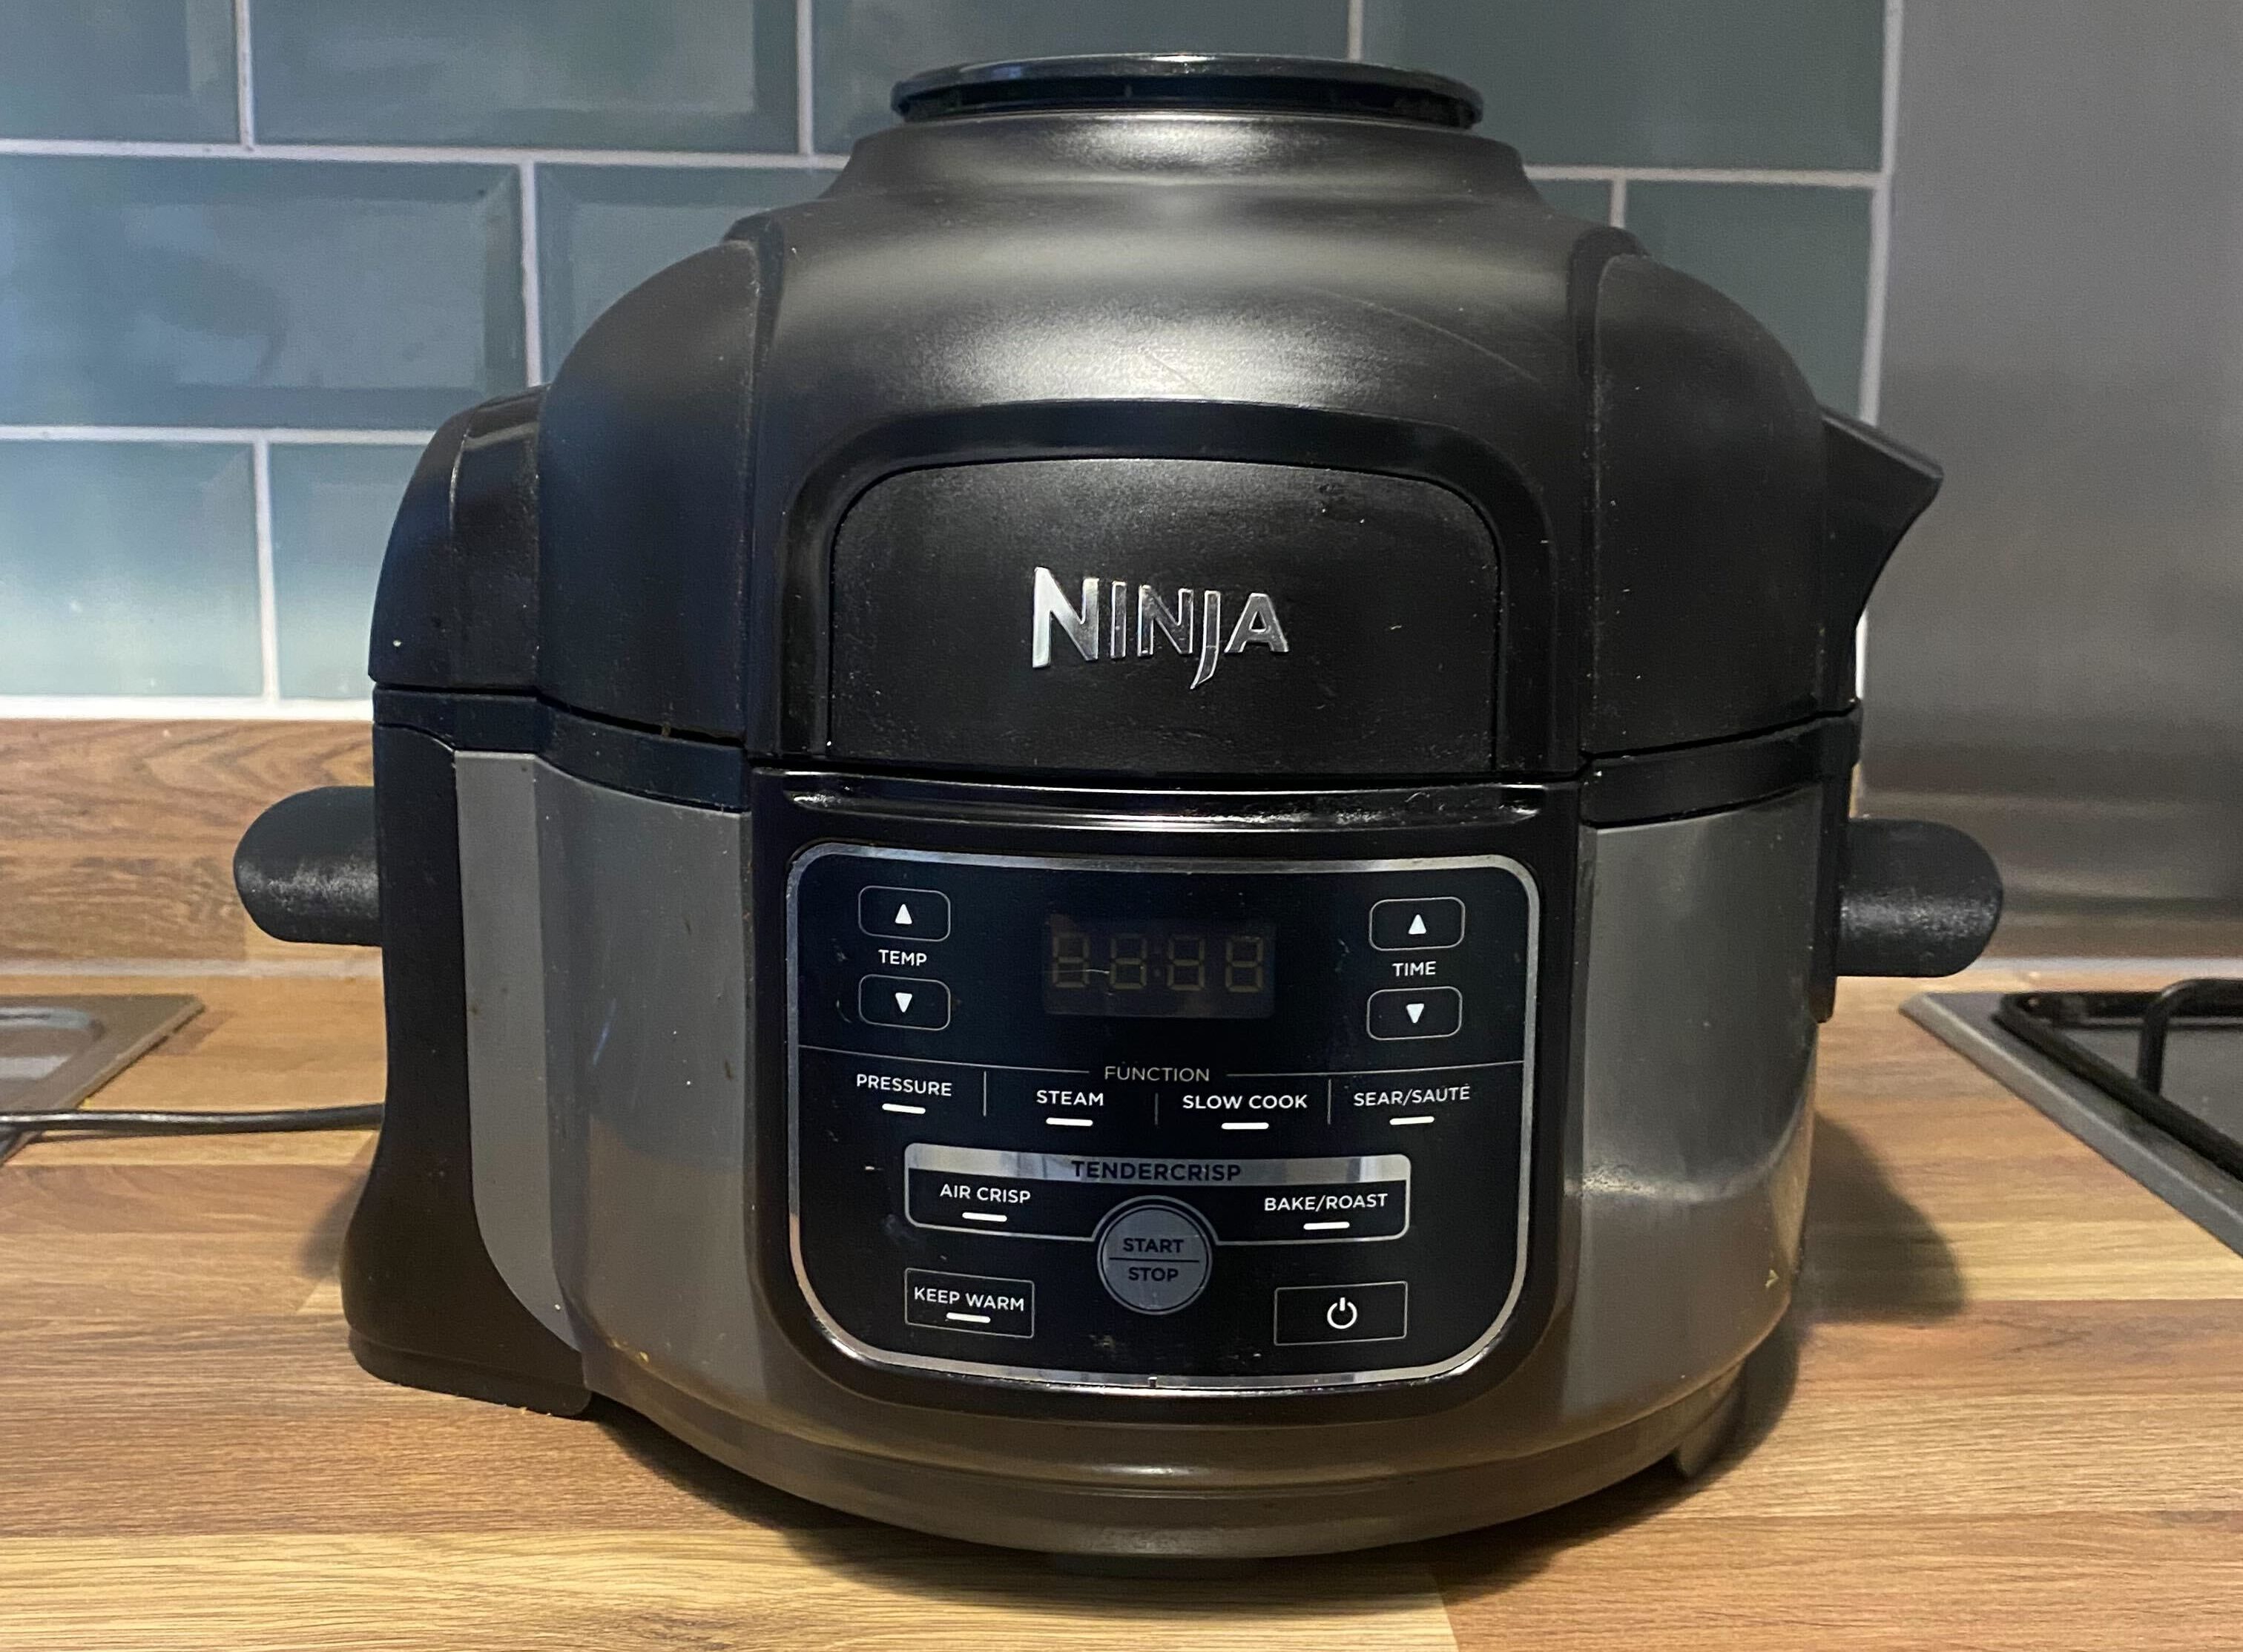 Ninja Foodi 9-in-1 Multi-Cooker tried & tested review - Your Home